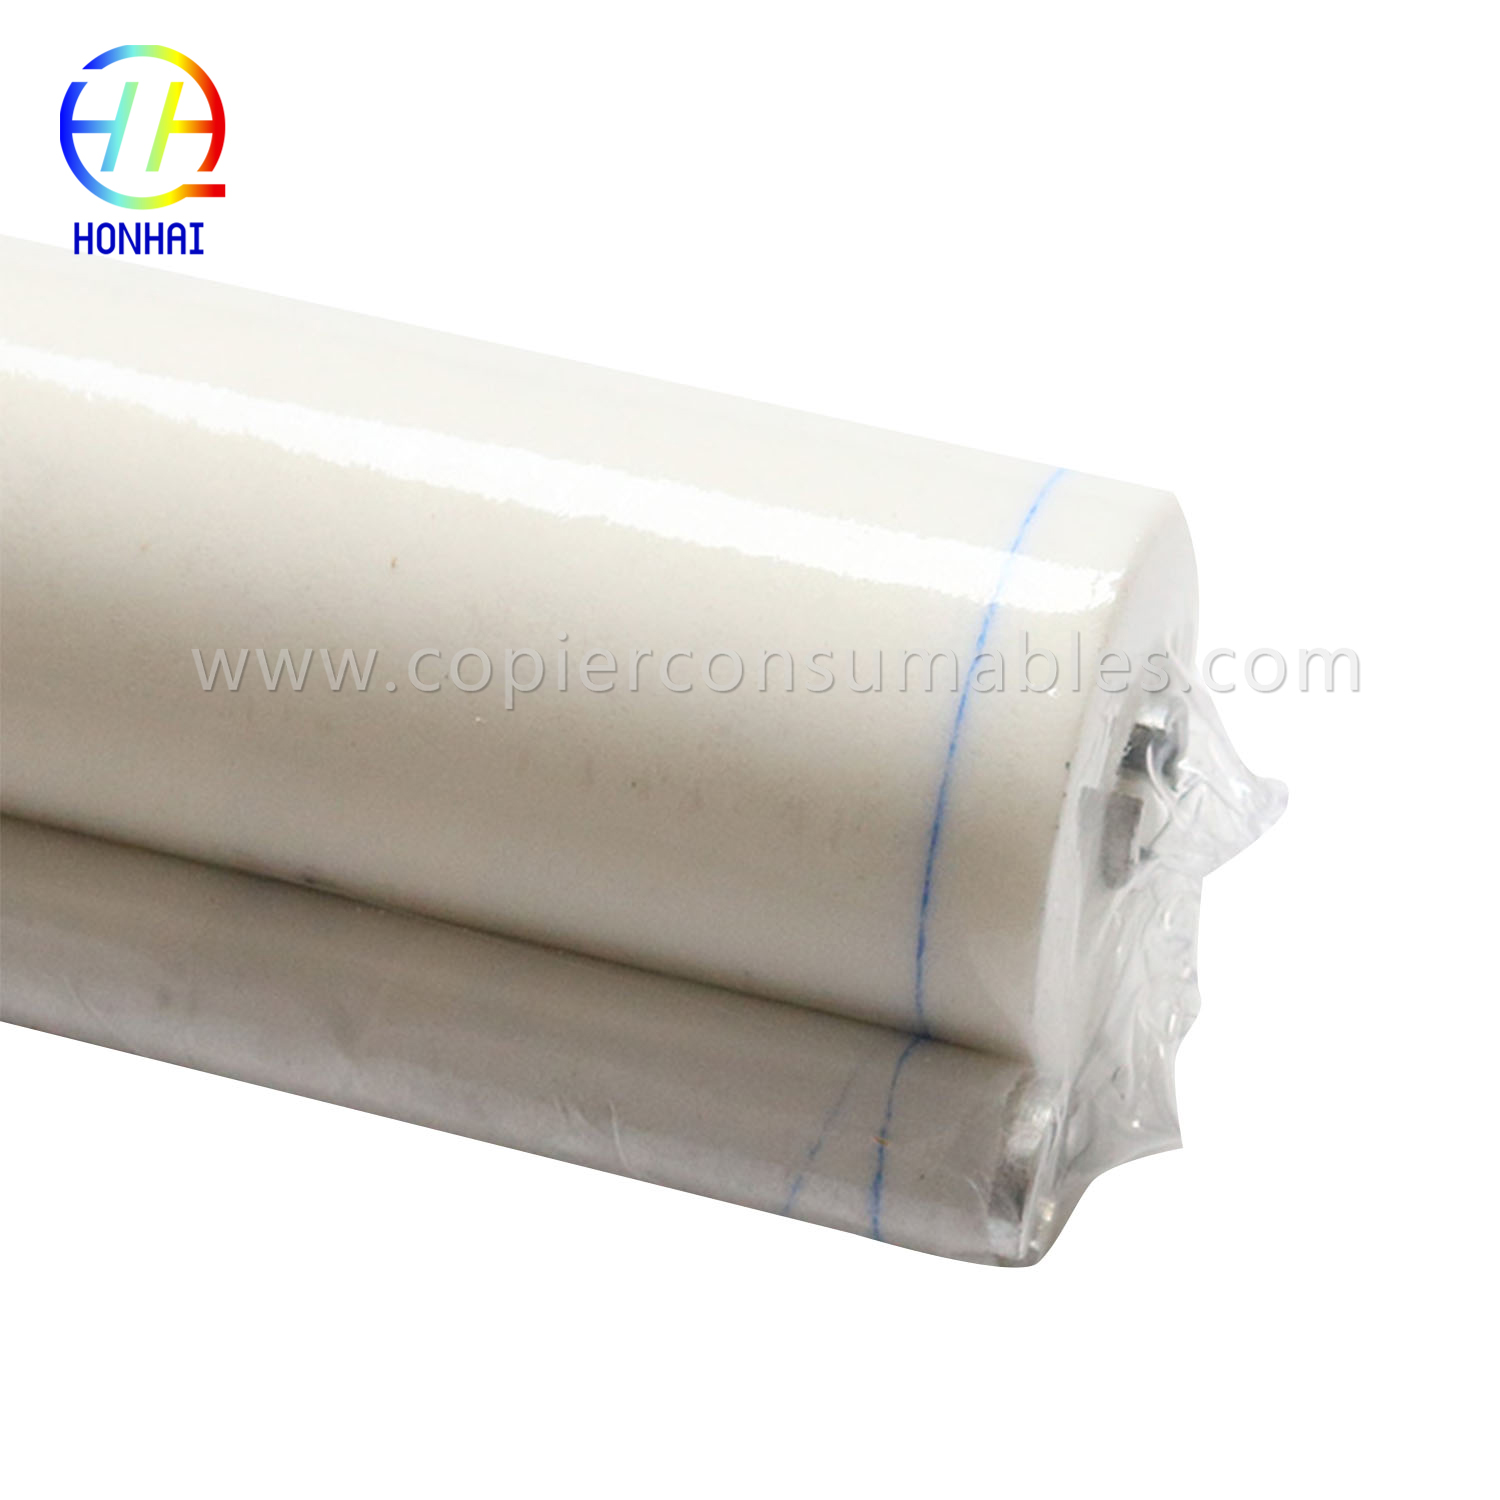 I-Web Cleaning Roller ye-Canon imageRUNNER 105 5000 5020 5050 5055 5065 5070 5075 550 5575 600 6000 6020 6570 7086 7065 7105 900 70-70 (7065 7105 900 7070)拷贝